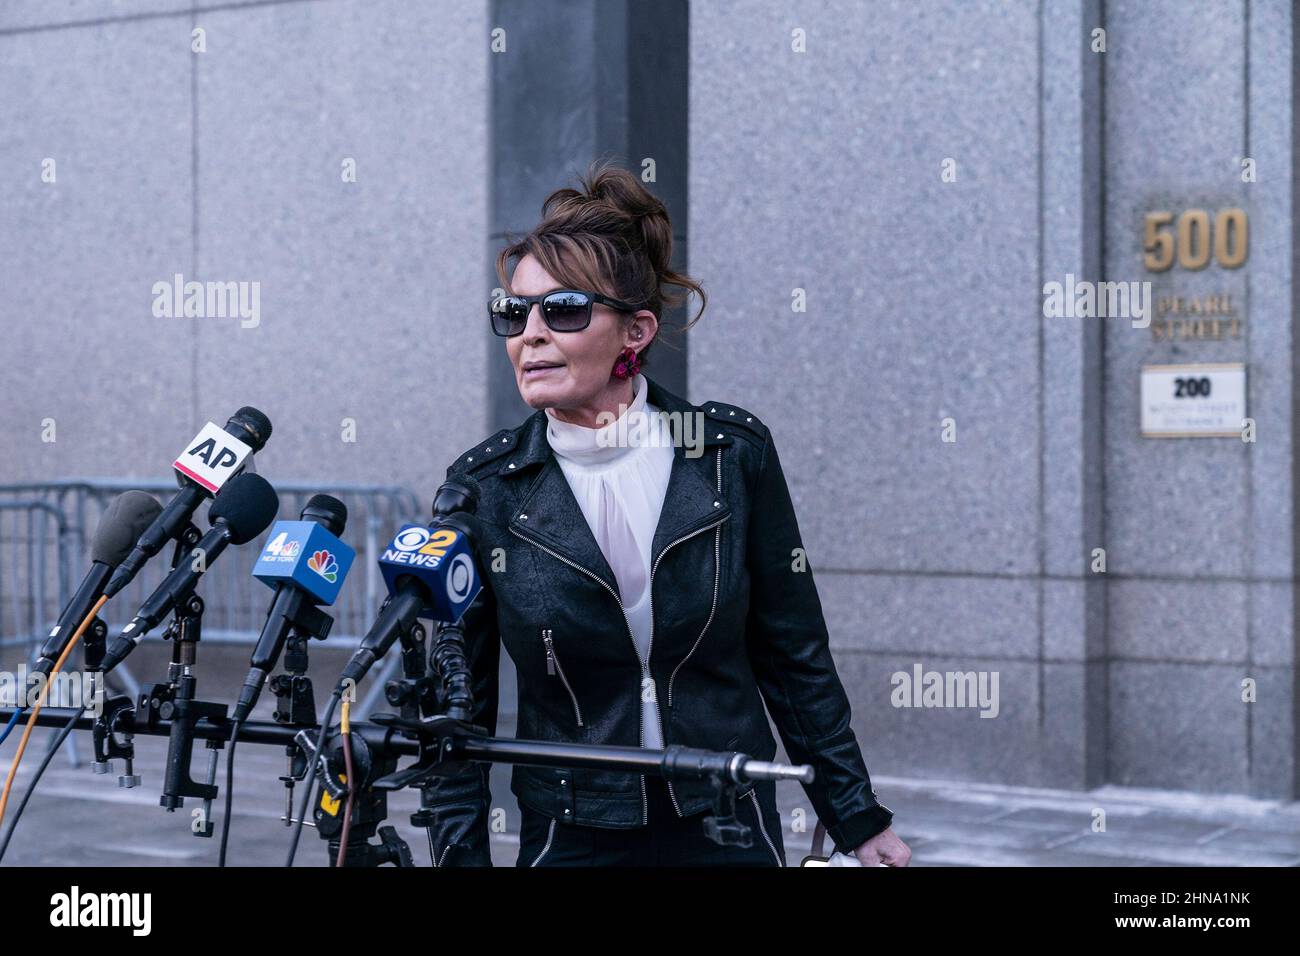 New York, United States. 14th Feb, 2022. Sarah Palin, former Governor of Alaska leaves court after judge Jed Rakoff dismissed her libel case against The New York Times at U.S. Southern District Court. She briefly addressed the media in front of the court. The jury is still deliberating as the judge made his decision apparently did not know about it. The judge said Palin had failed to show that The New York Times had acted out of malice. (Photo by Lev Radin/Pacific Press) Credit: Pacific Press Media Production Corp./Alamy Live News Stock Photo